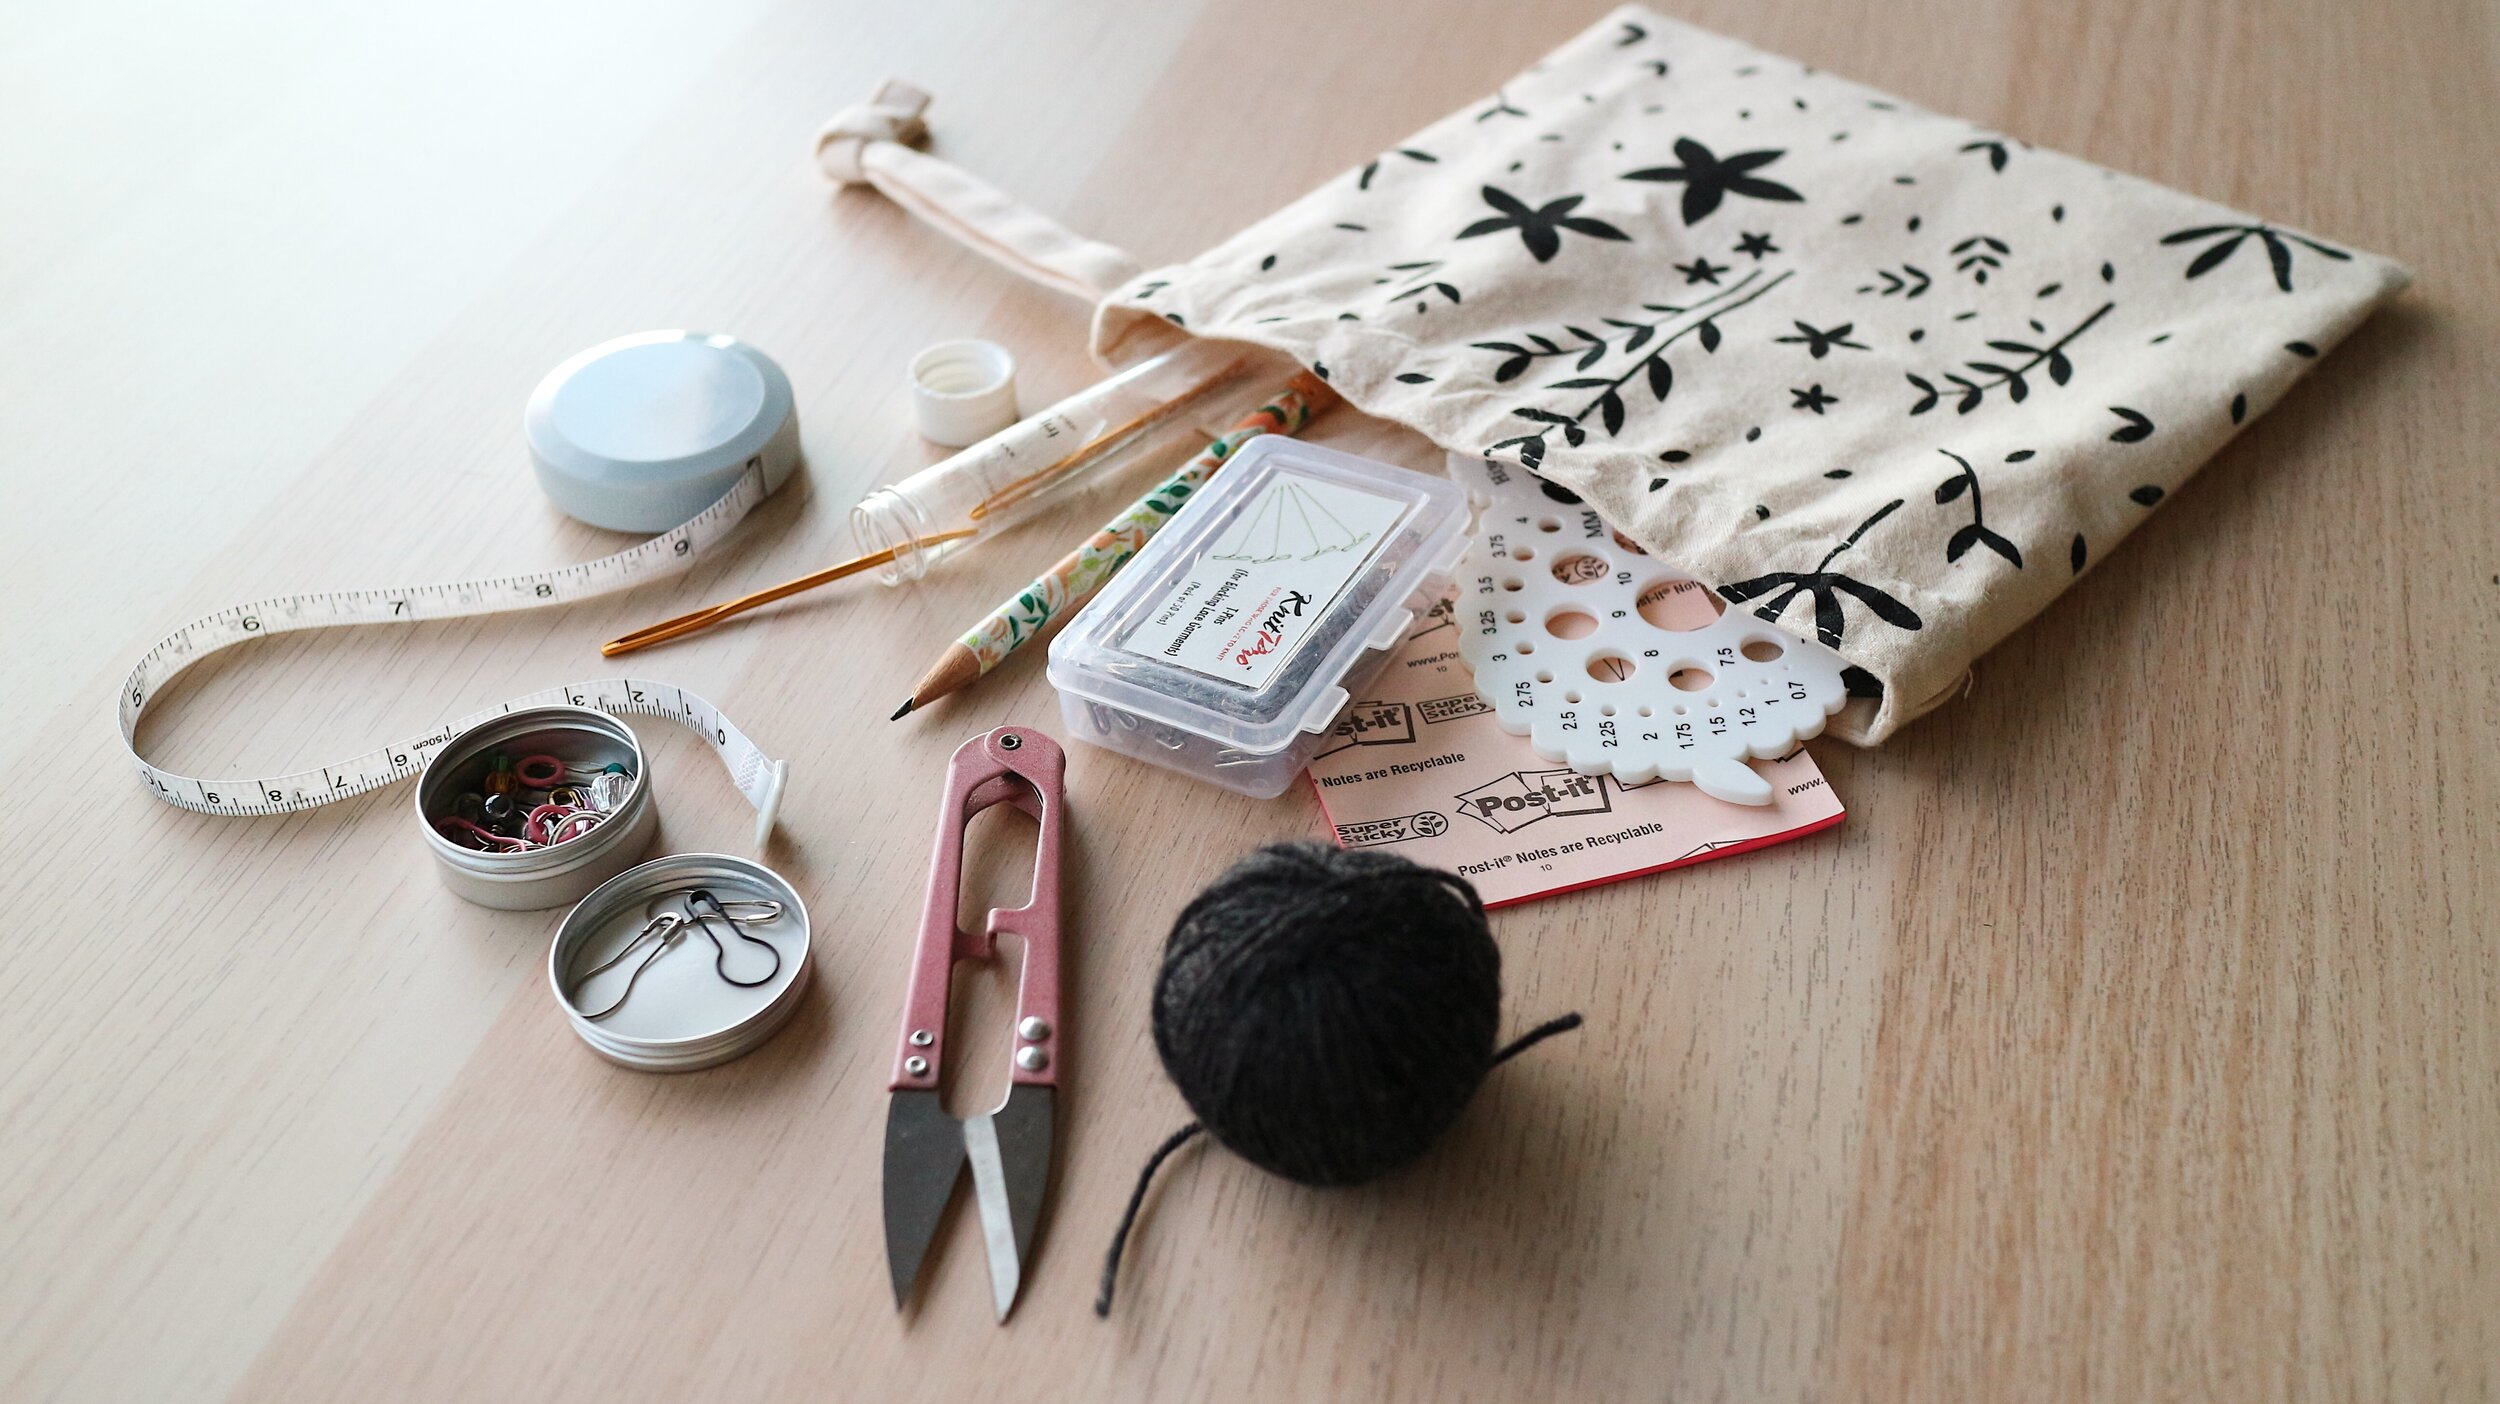 What Are Knitting Notions? - The Tools Every Knitters Needs — Alex Collins